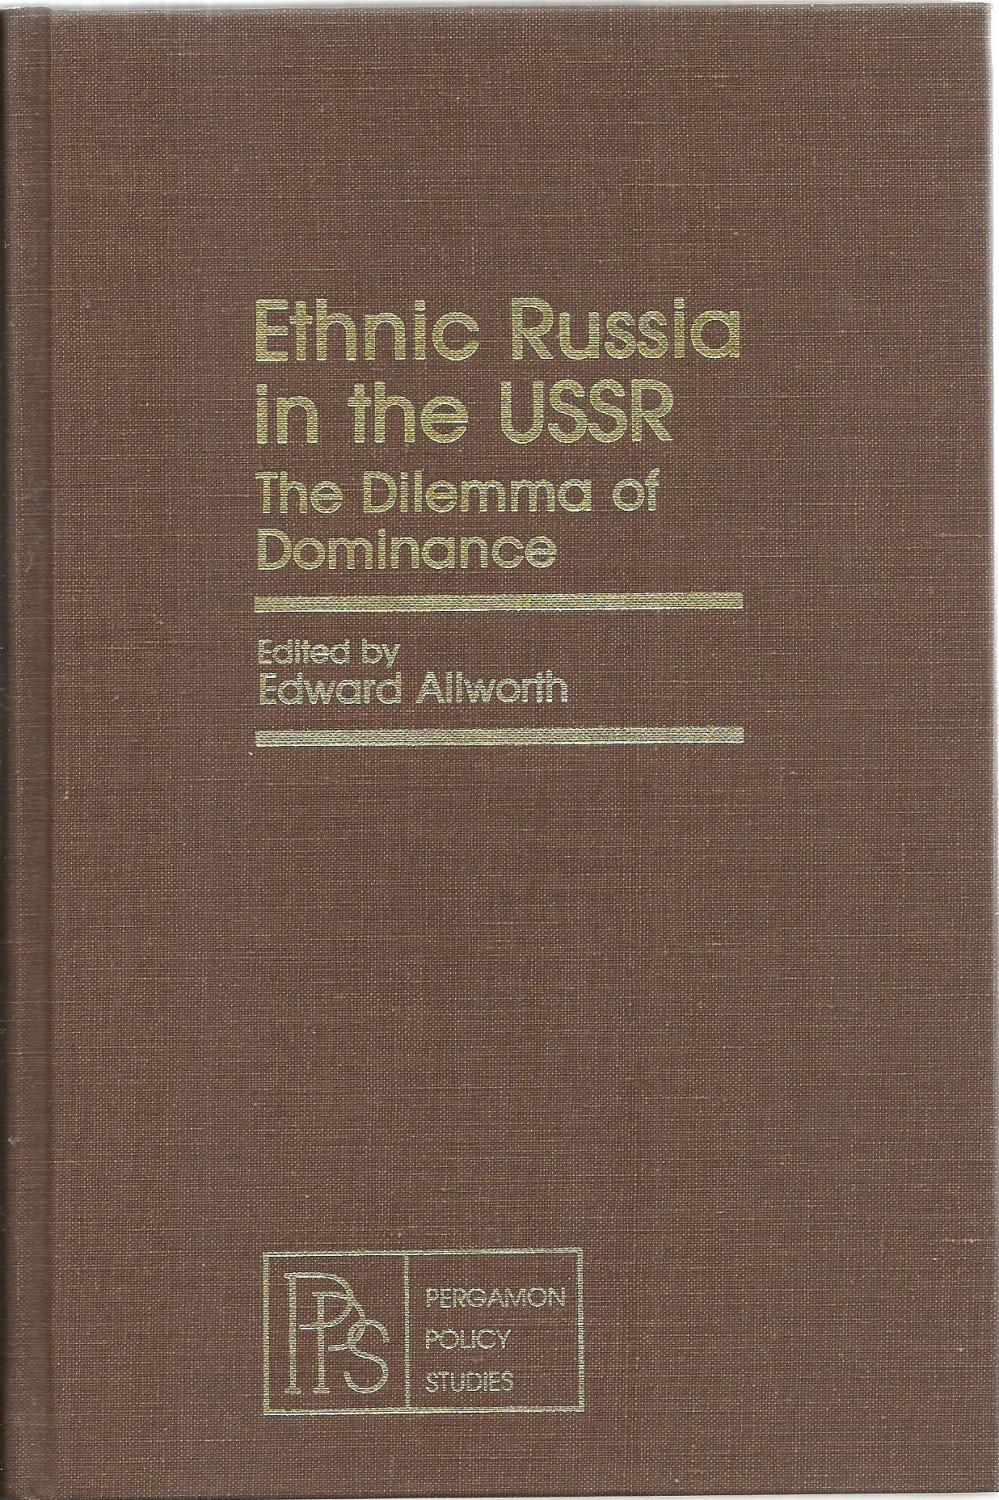 Ethnic Russia in the USSR: The Dilema of Dominance - Edited by Edward Allworth